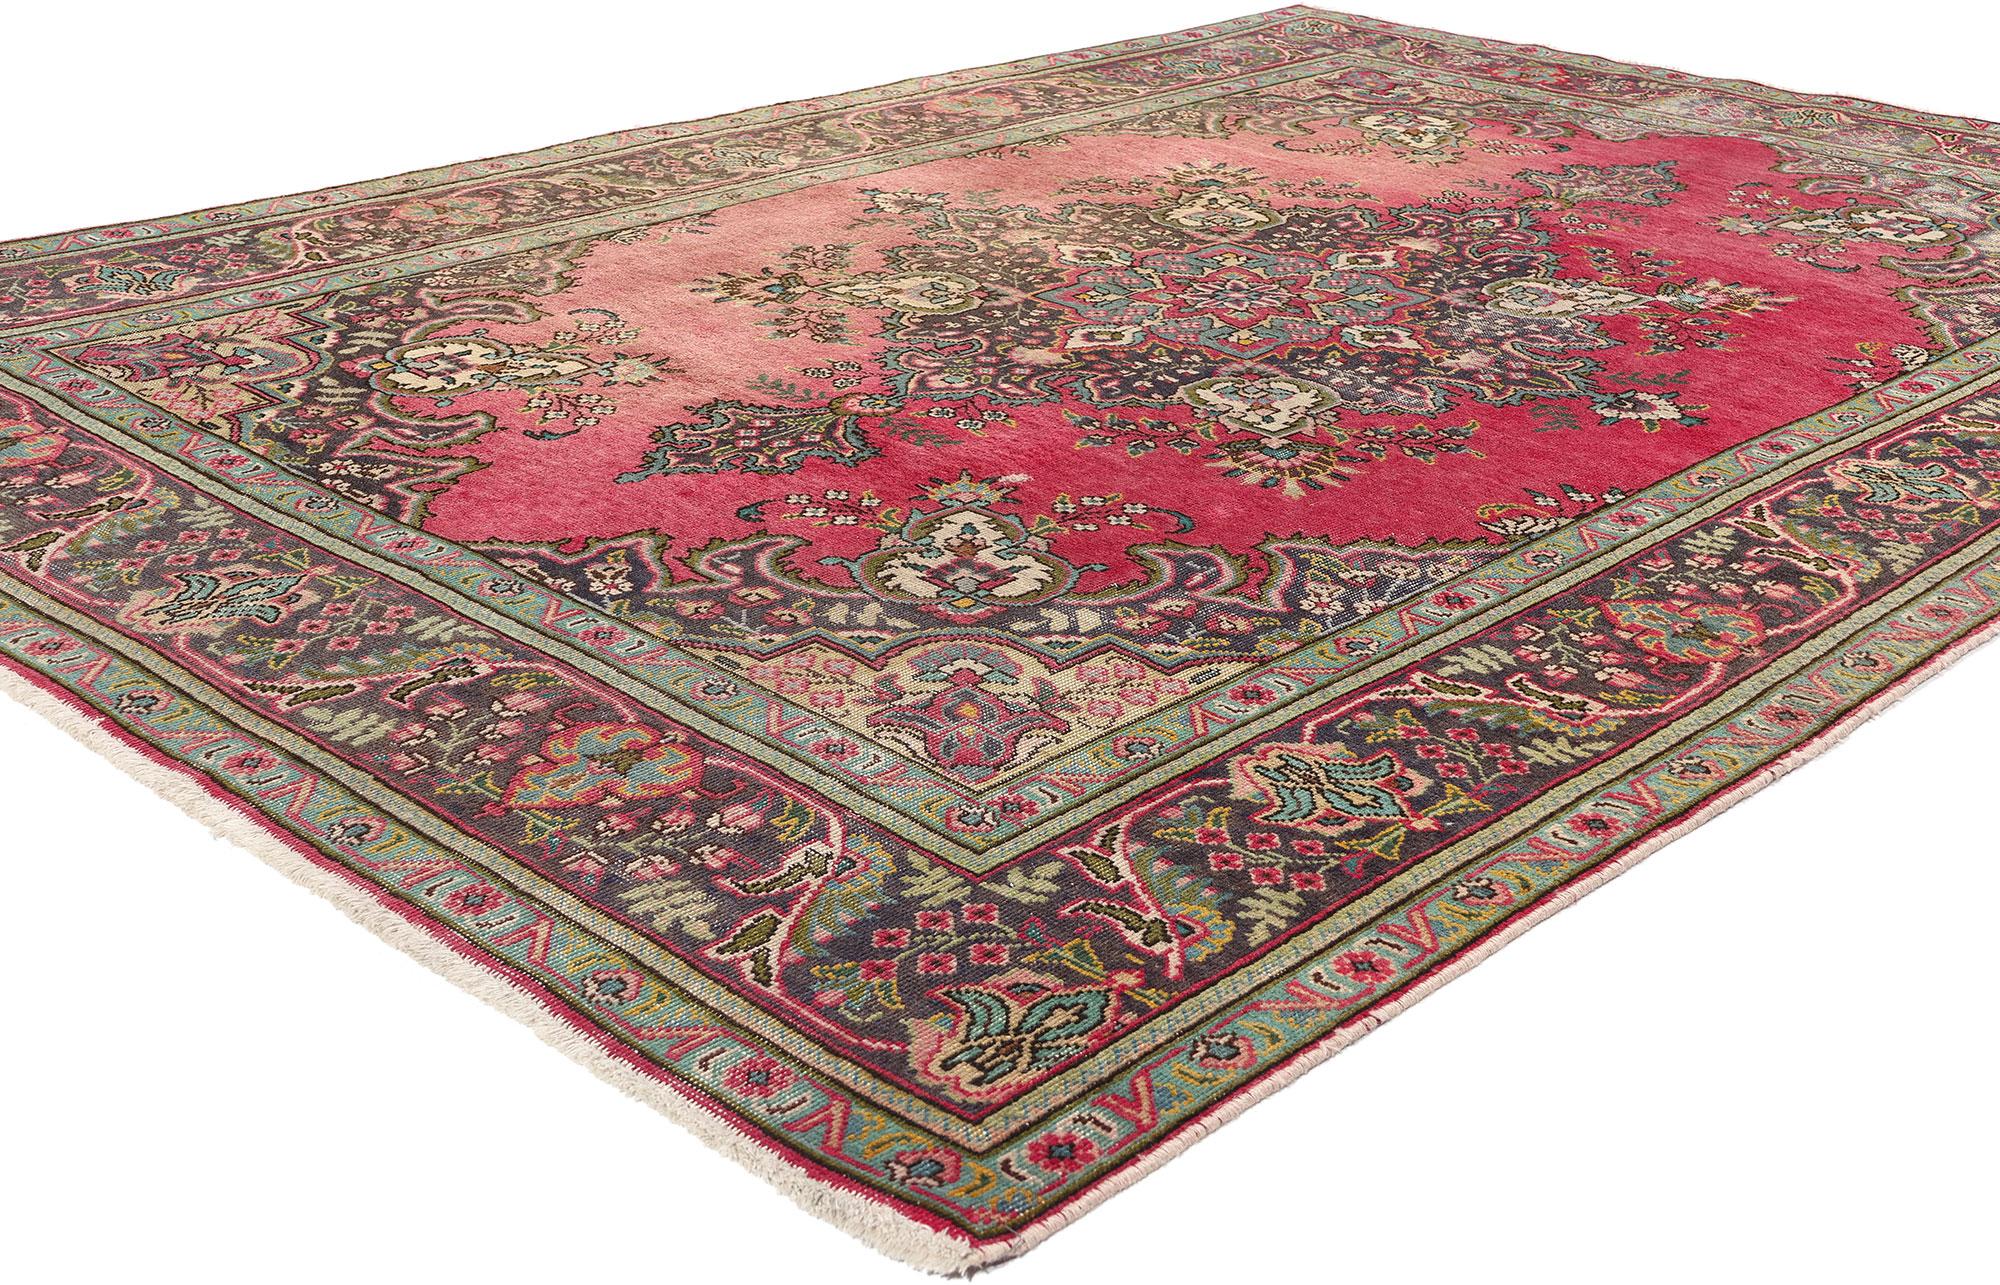 76465 Vintage Cherry Pink Persian Tabriz Rug, 06'07 x 09'07. Tabriz rugs, originating from the historic city of Tabriz in Iran, represent the pinnacle of Persian carpet weaving, celebrated for their intricate designs and exceptional craftsmanship.